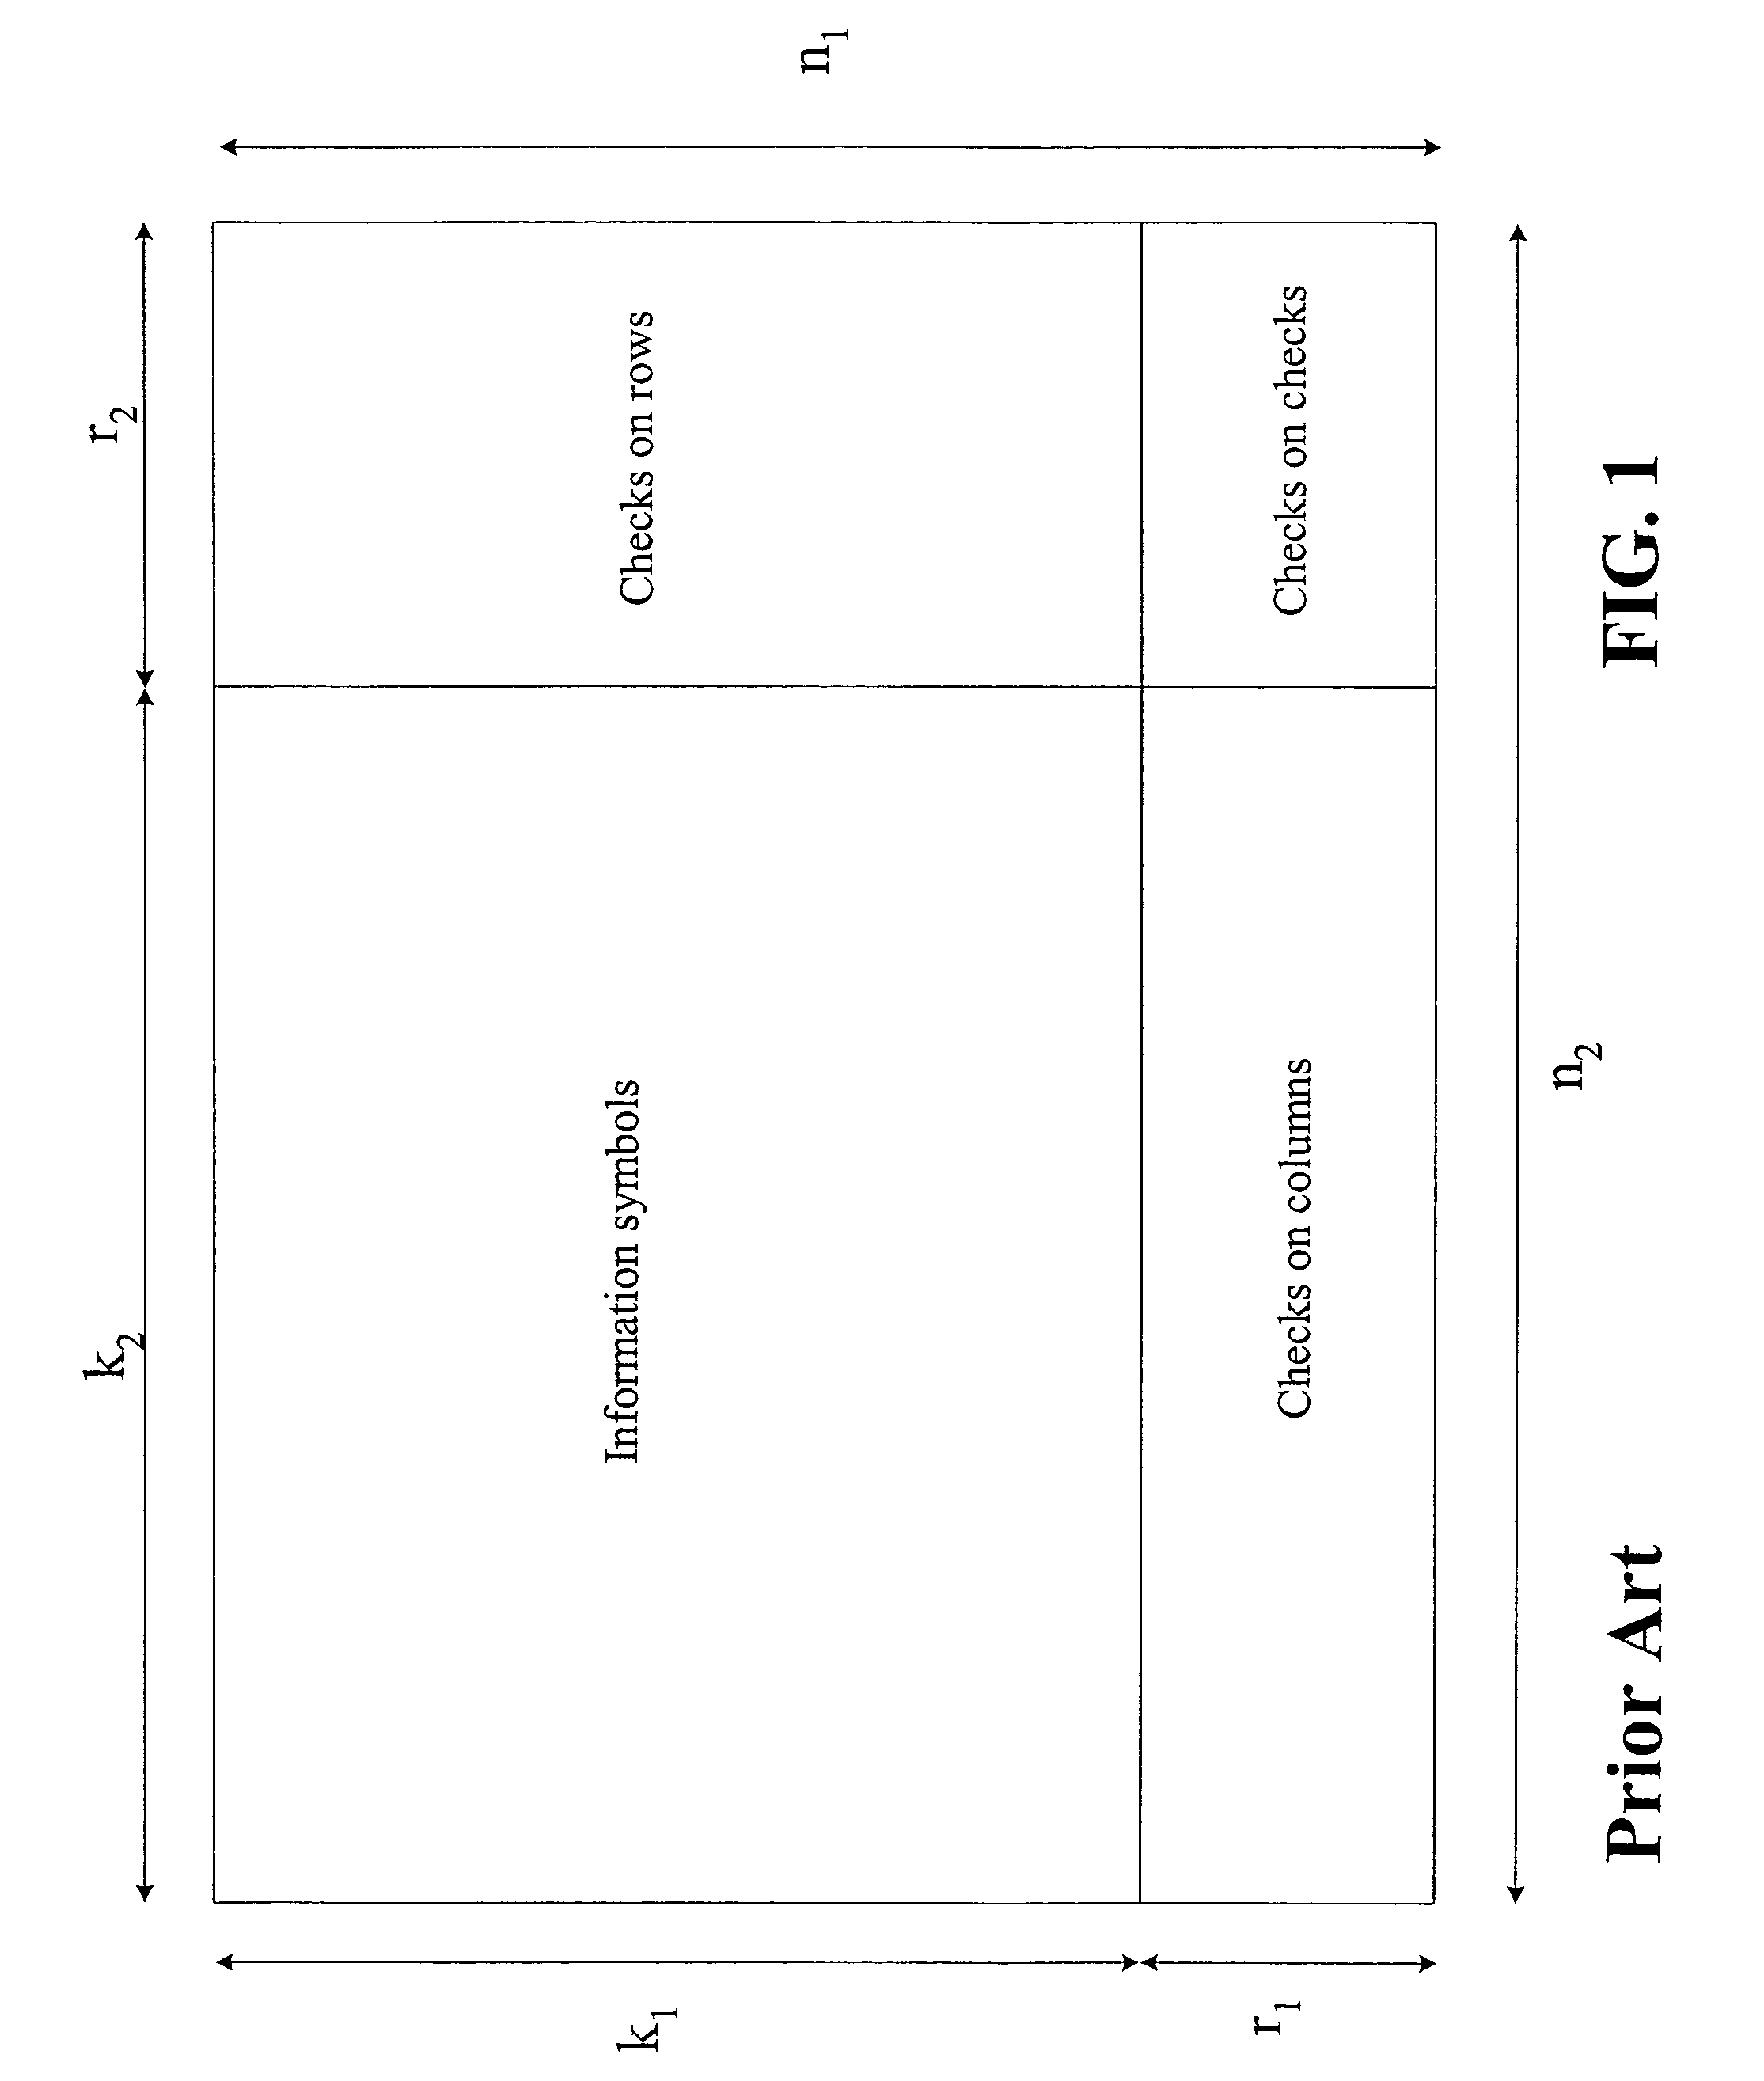 Multi-dimensional irregular array codes and methods for forward error correction, and apparatuses and systems employing such codes and methods